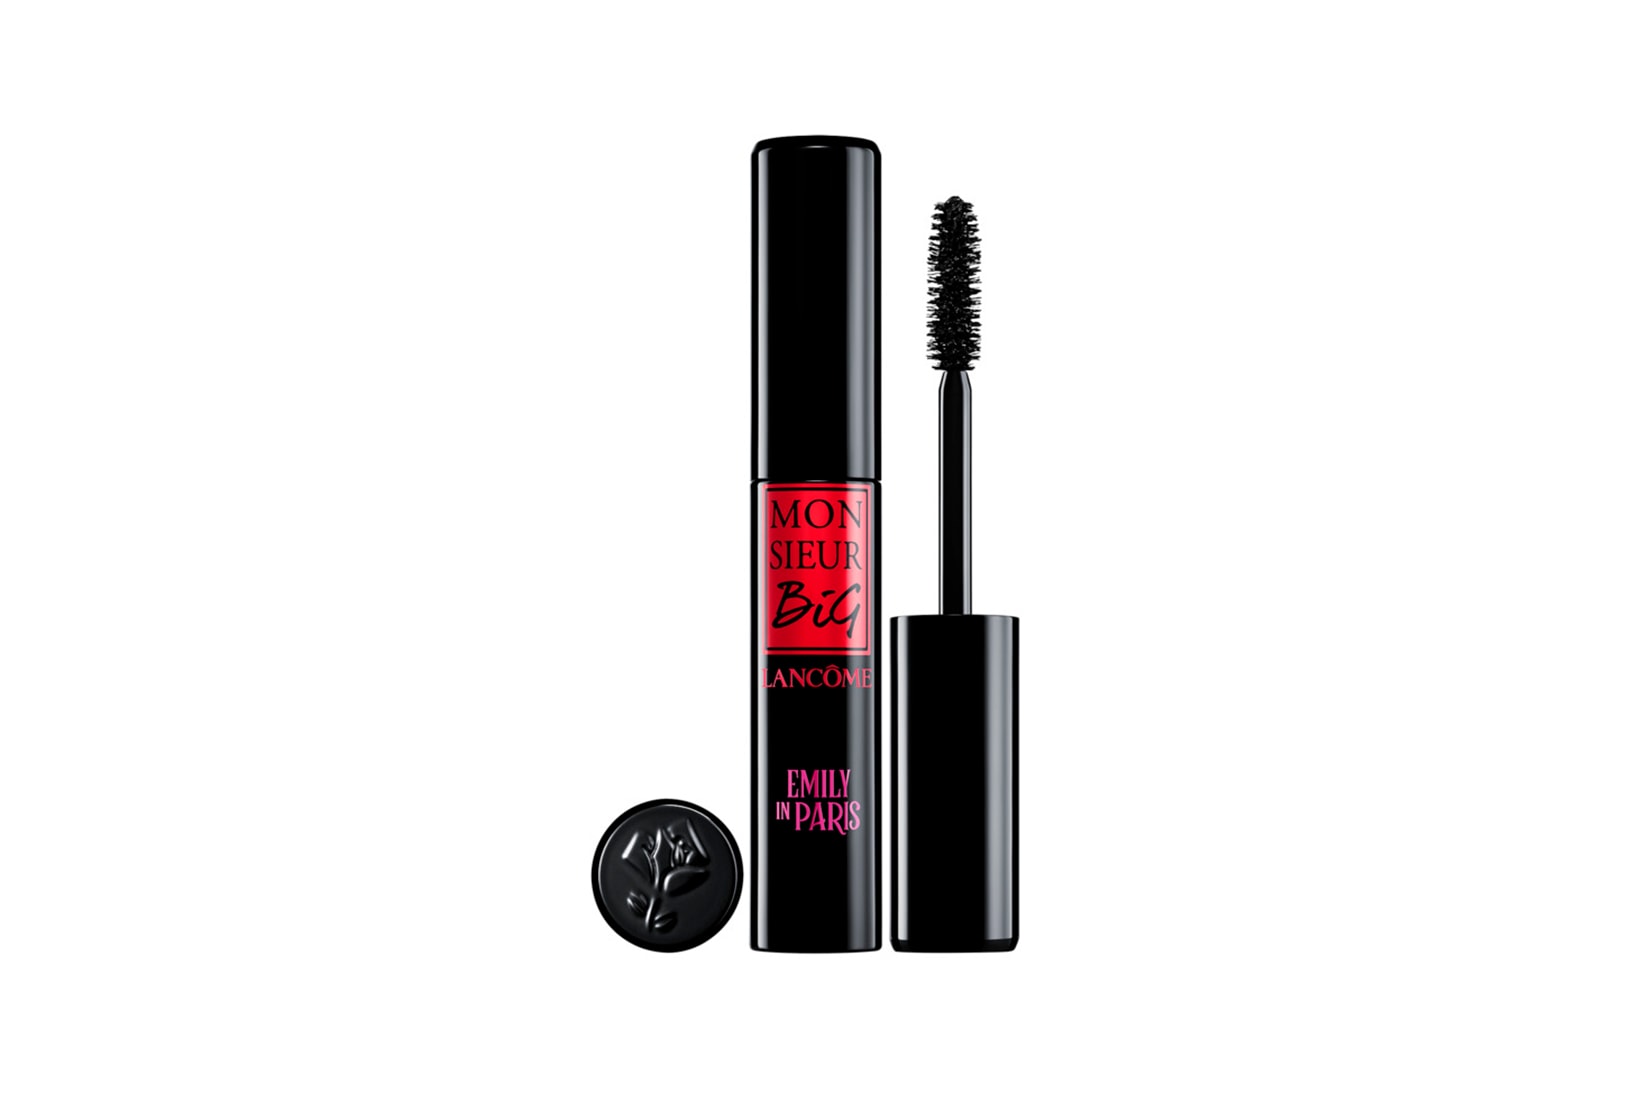 The collection includes limited-edition artwork for dedicated BLINKs Lancôme Lily Collins Netflix TV Show Makeup Mascara